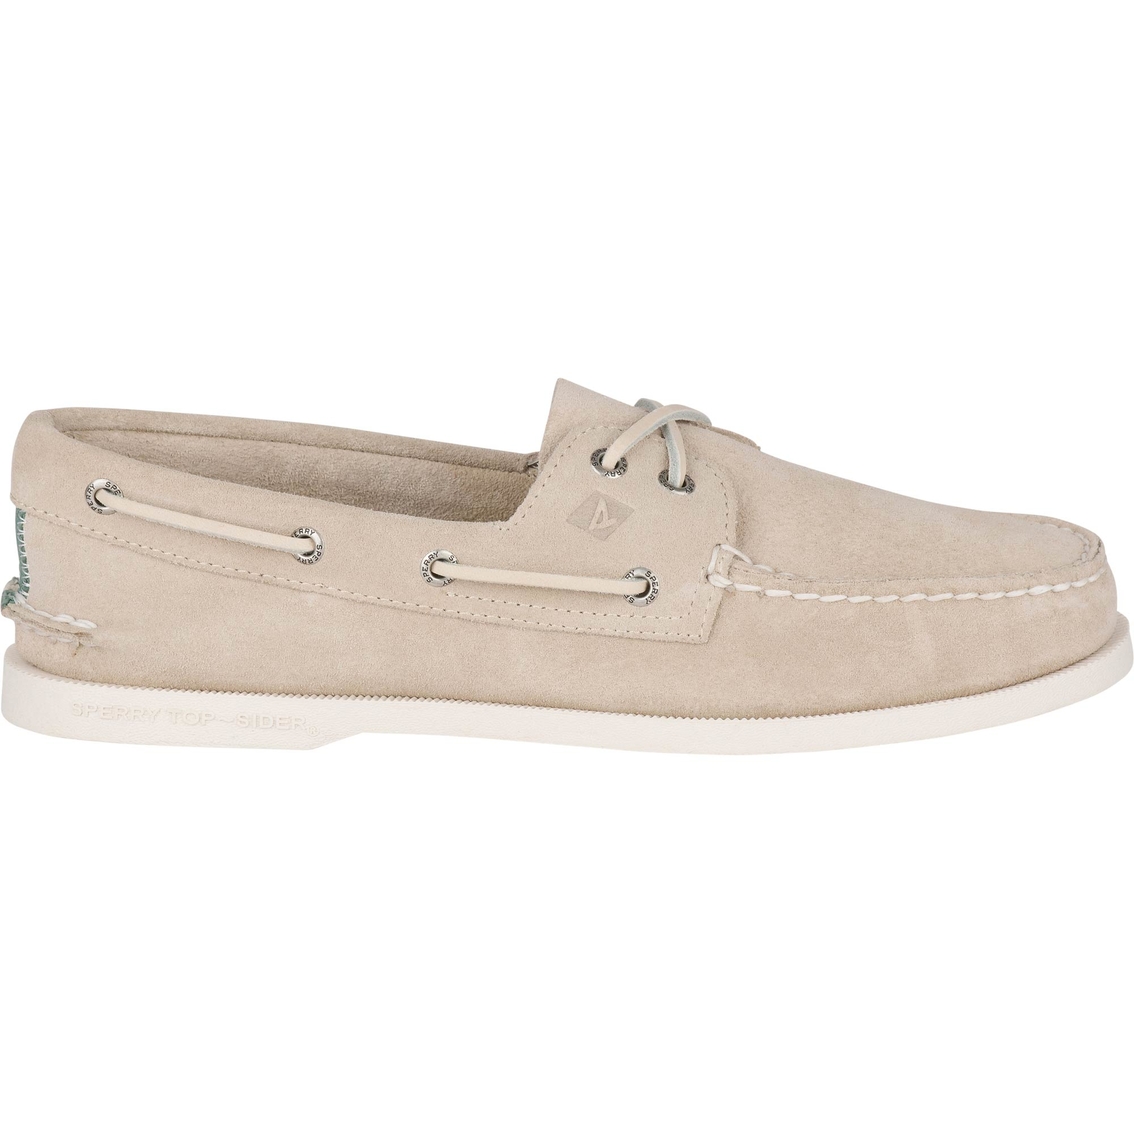 Sperry Authentic Original 2 Eye Summer Suede Boat Shoes - Image 2 of 6